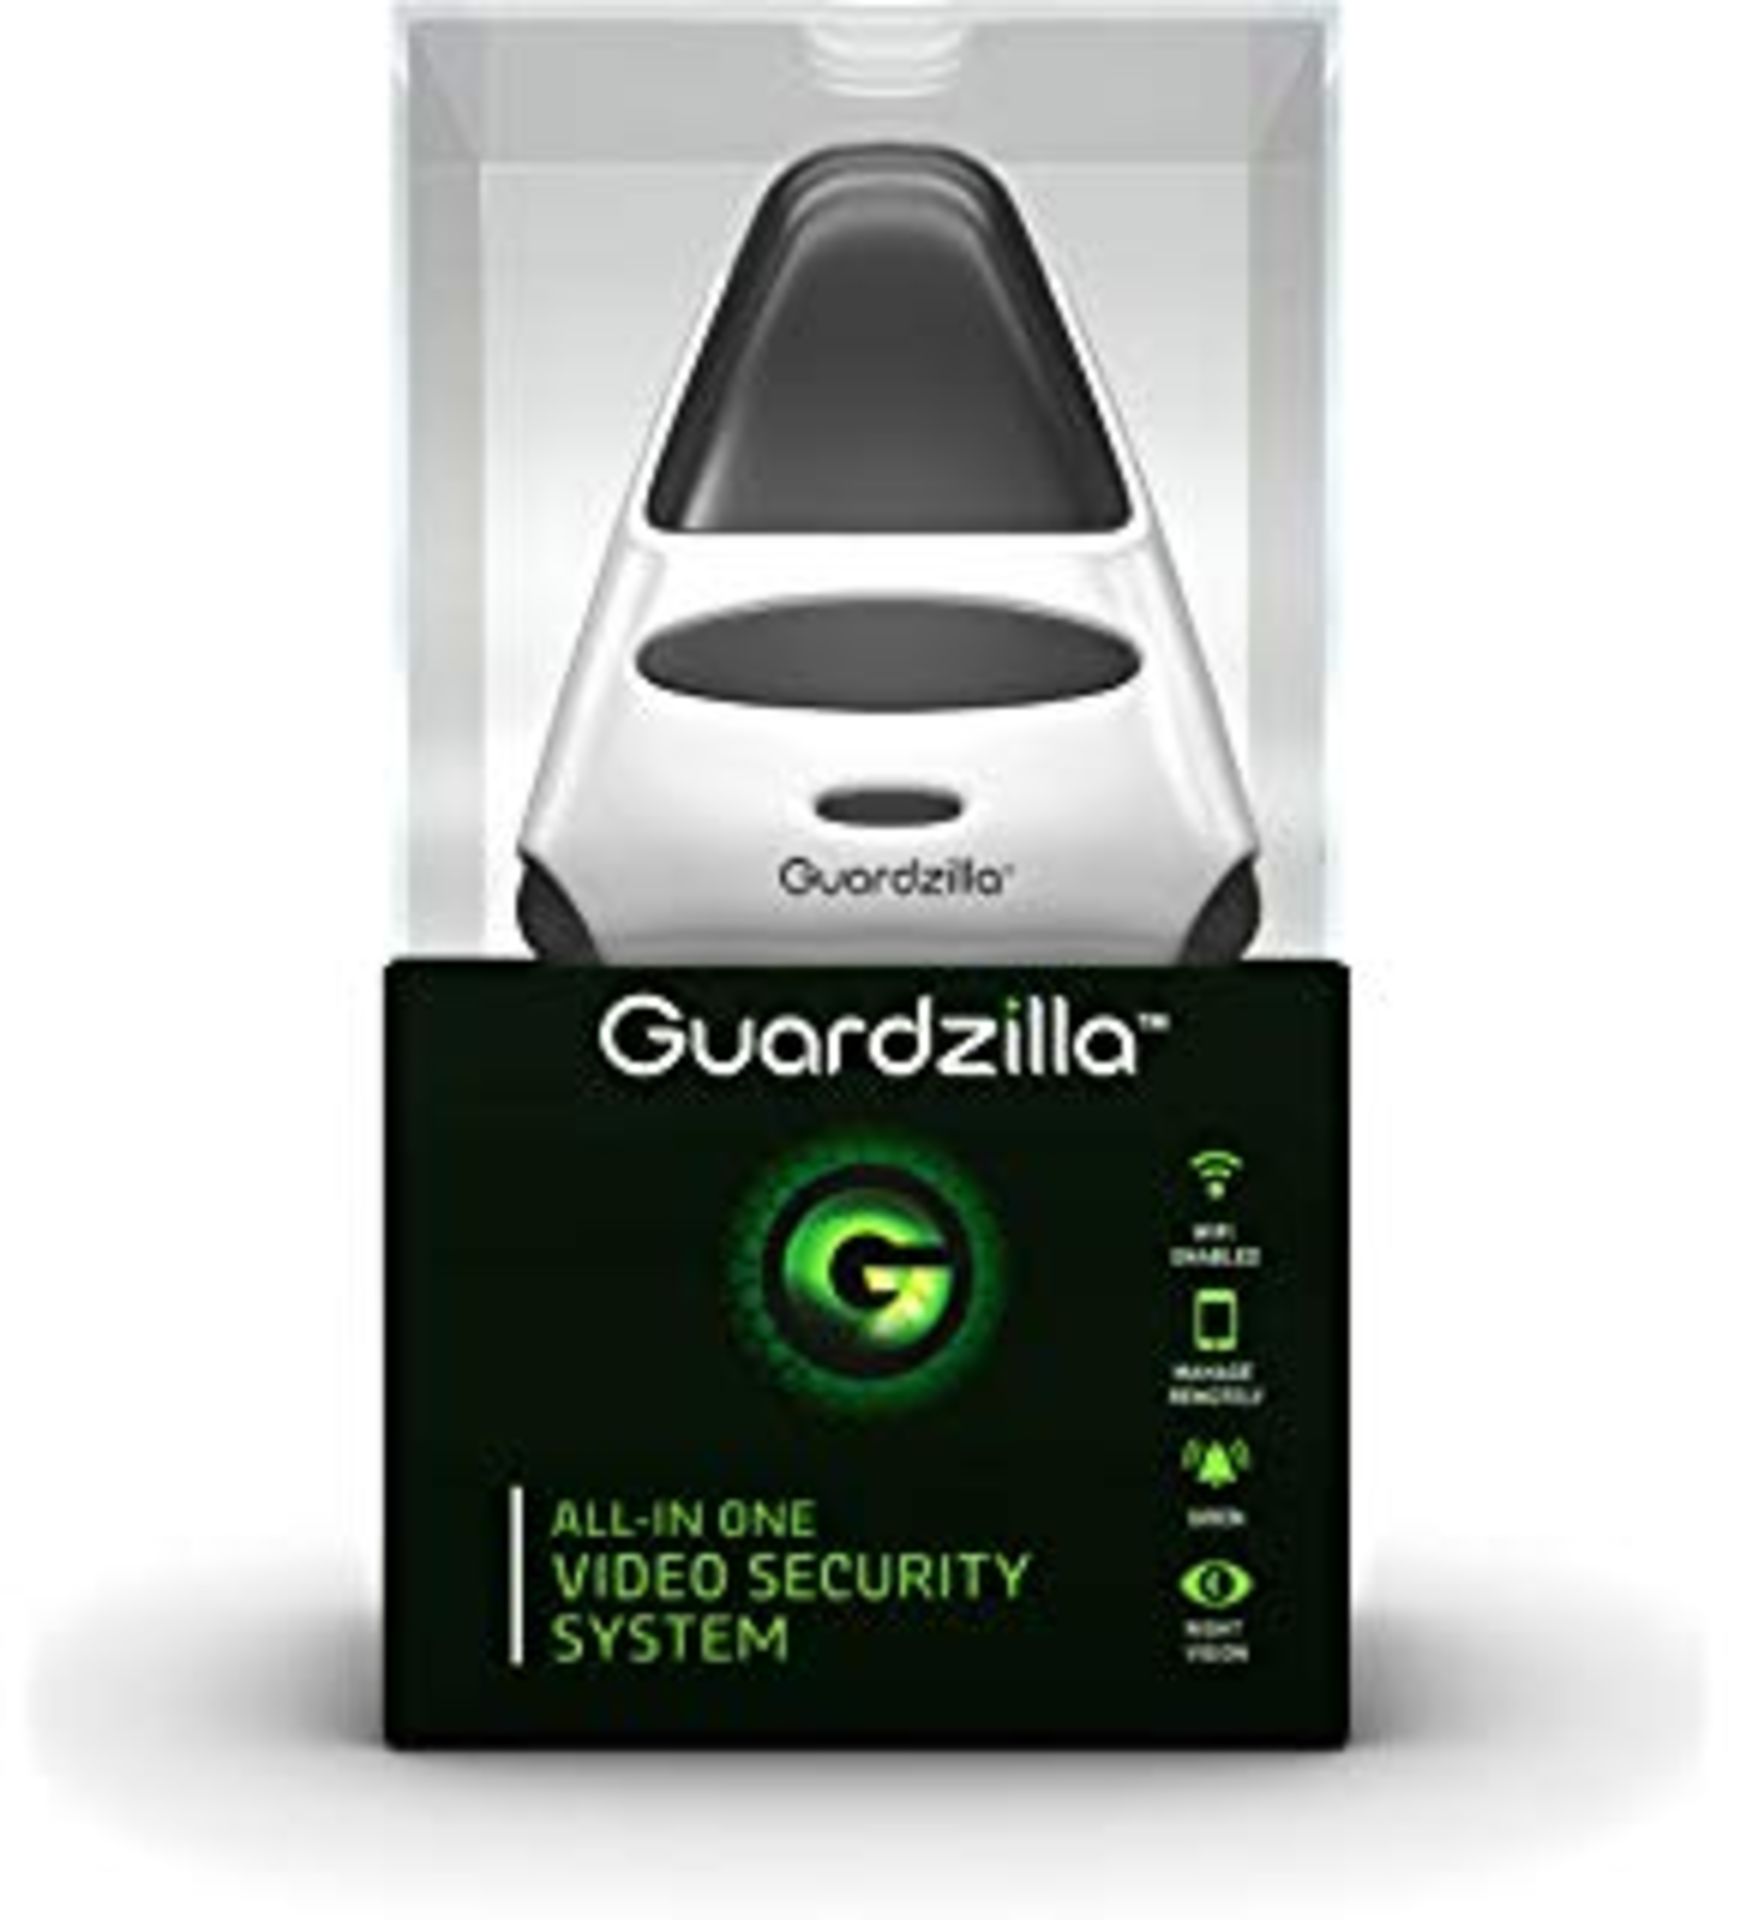 V Brand New Guardzilla All-In-One HD Security System Including Camera + Siren + Smartphone Remote - Image 2 of 2